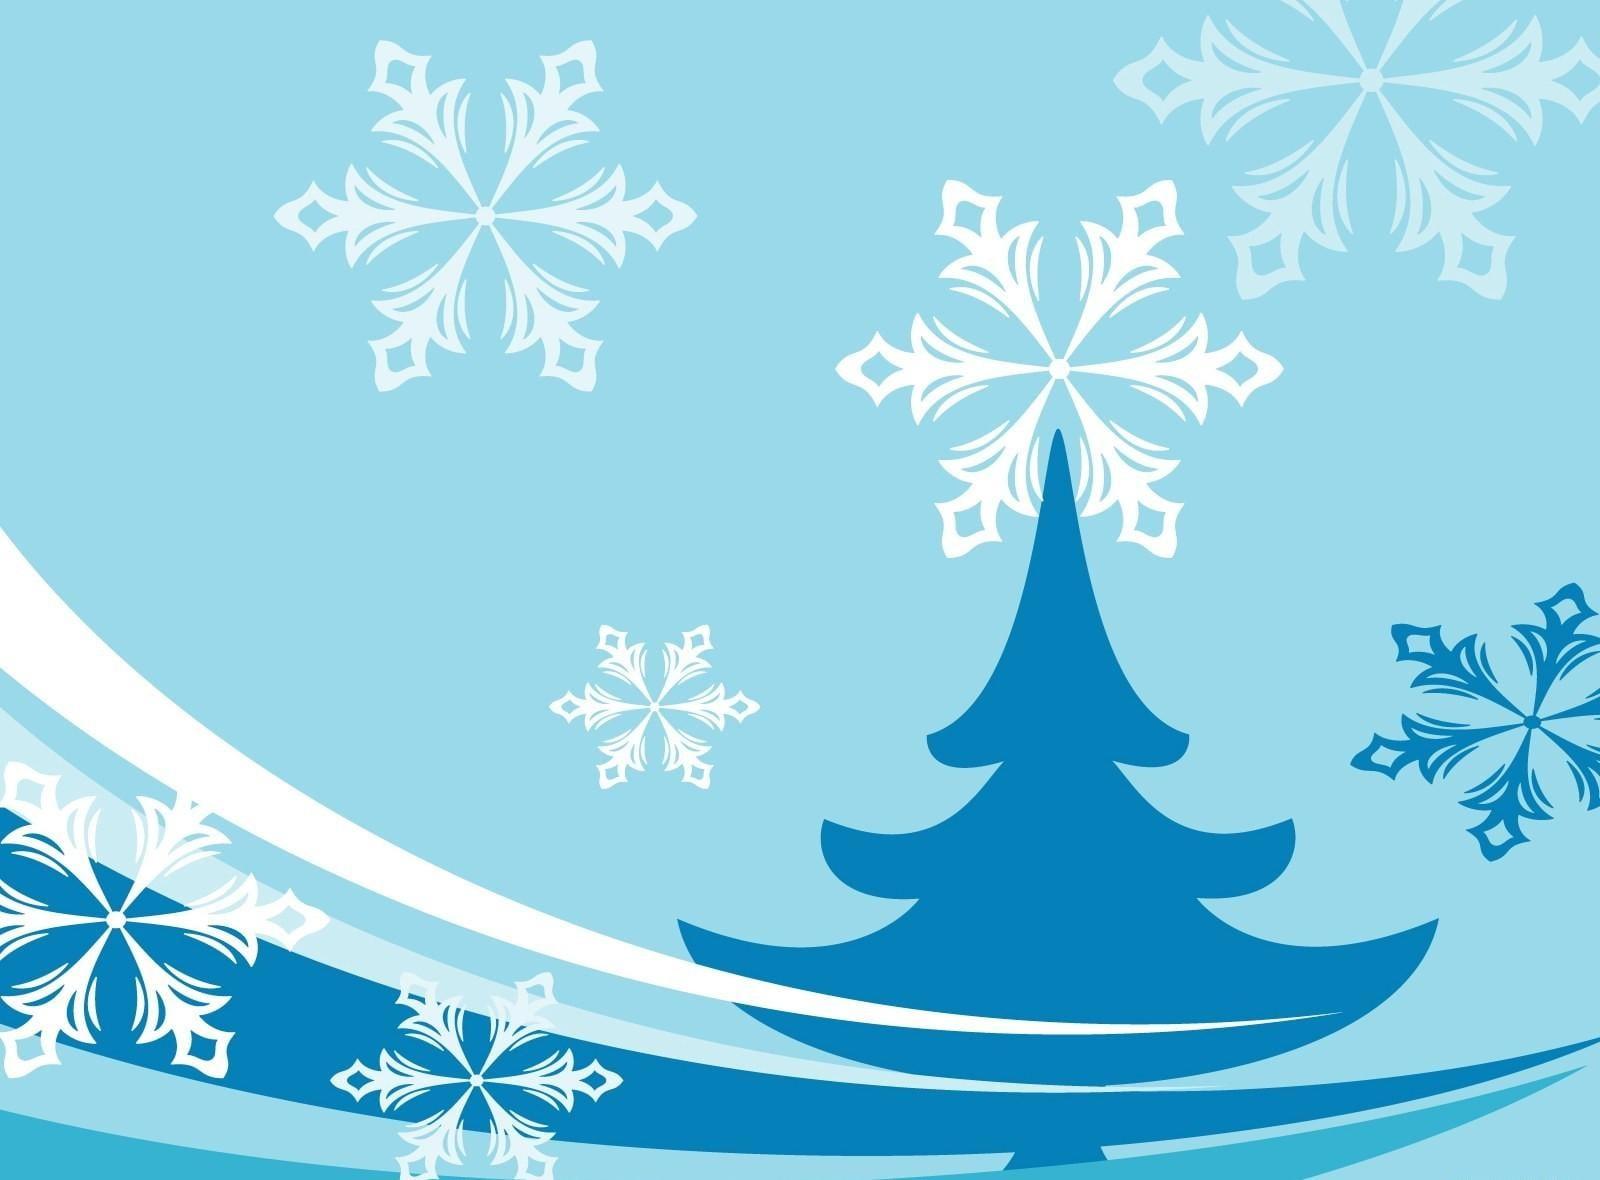 Blue and white Christmas tree and snowflakes digital